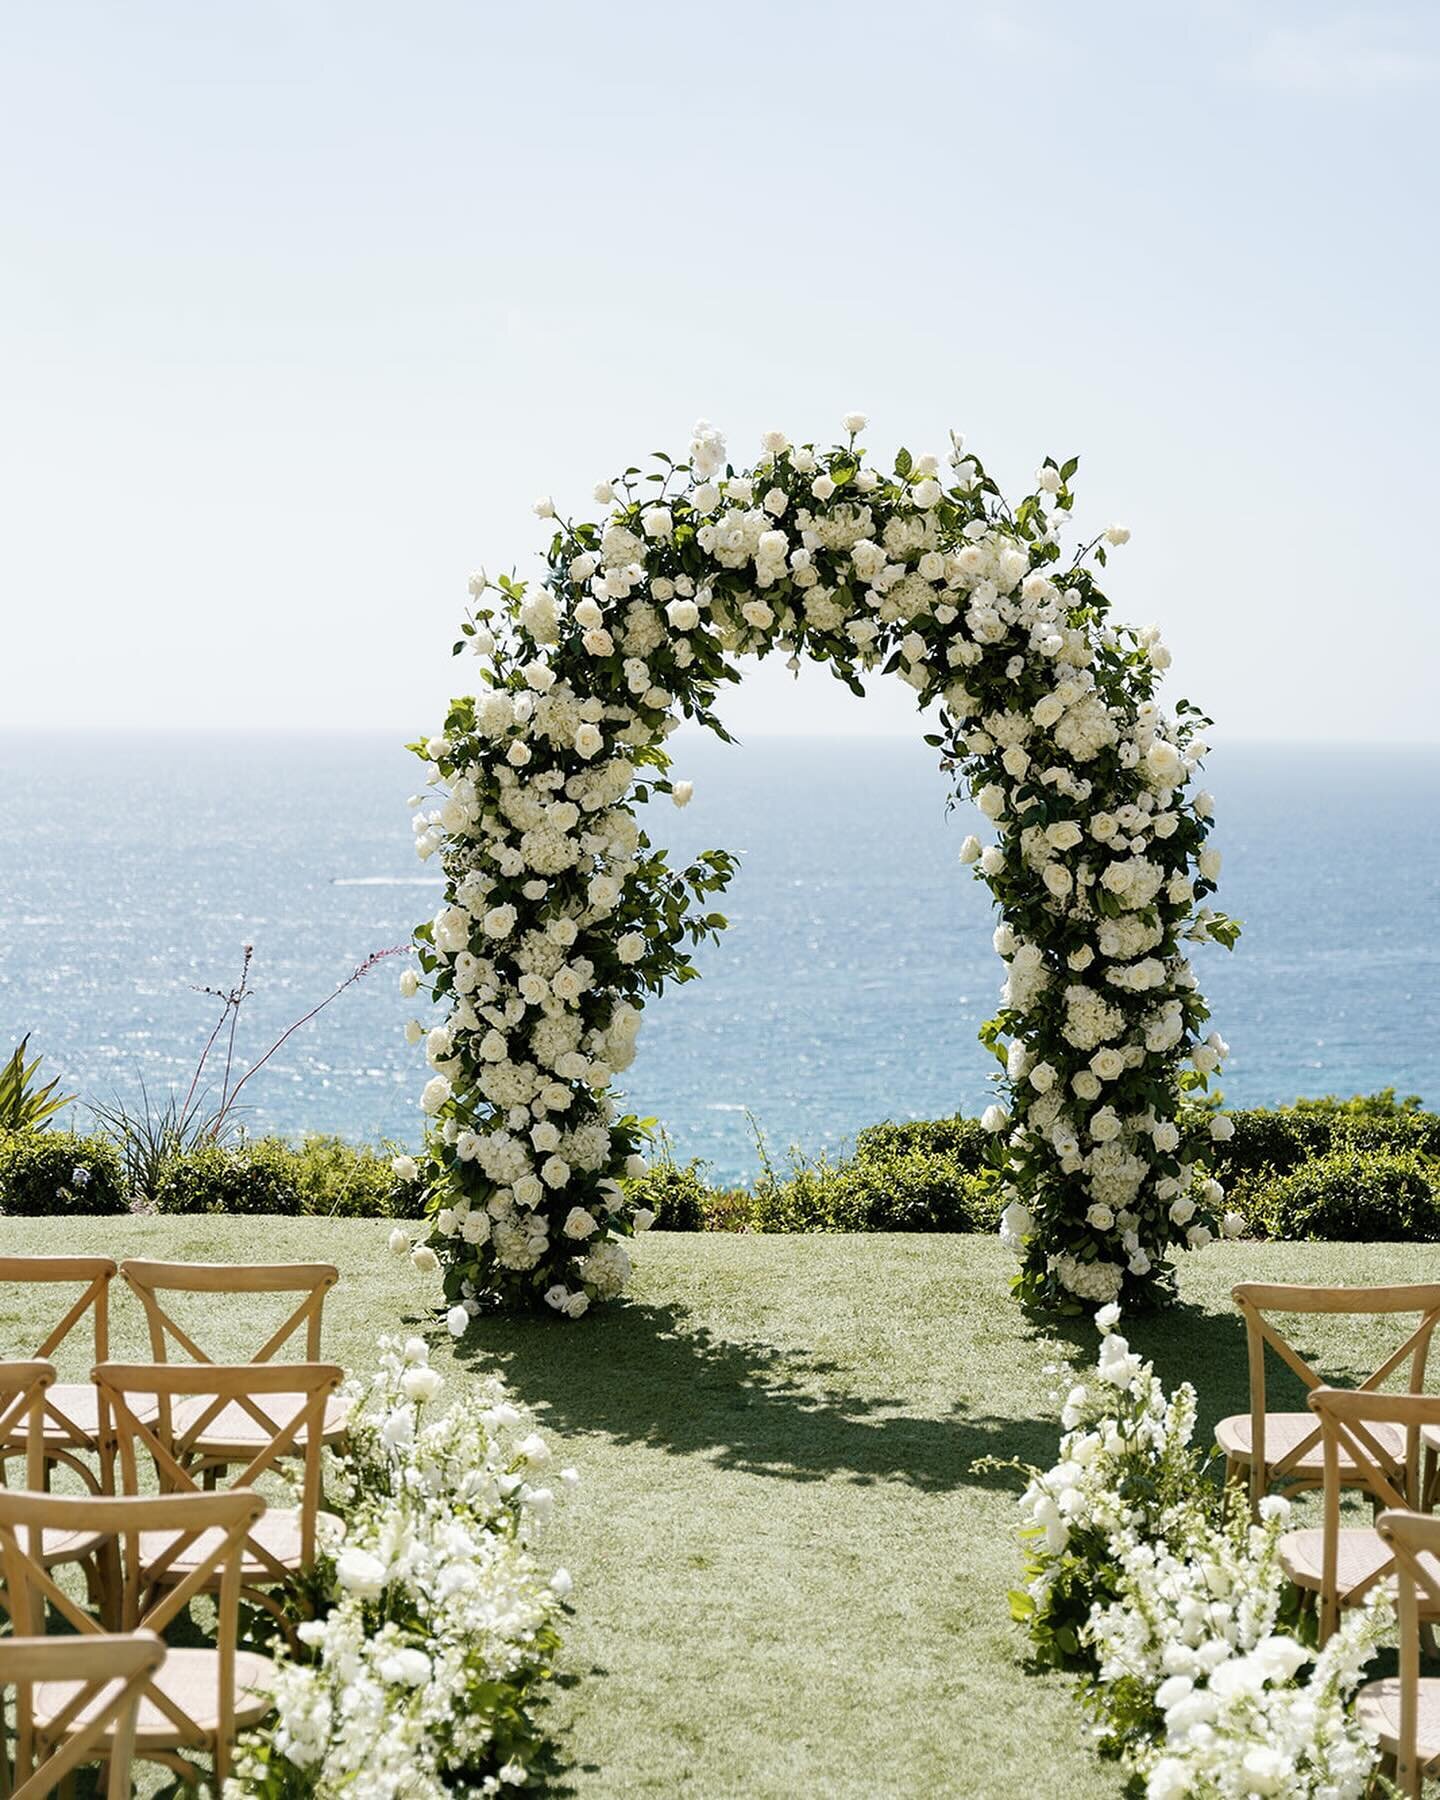 Ceremony with a stunning unobstructed ocean view ✔️
We loved designing this ceremony space at @ritzcarltonlagunaniguel with @knotjustflowers 
Images captured by @taryngreyphotography 🤍 rentals @brighteventrentals 
#ritzcarltonlagunaniguel #ritzcarlt